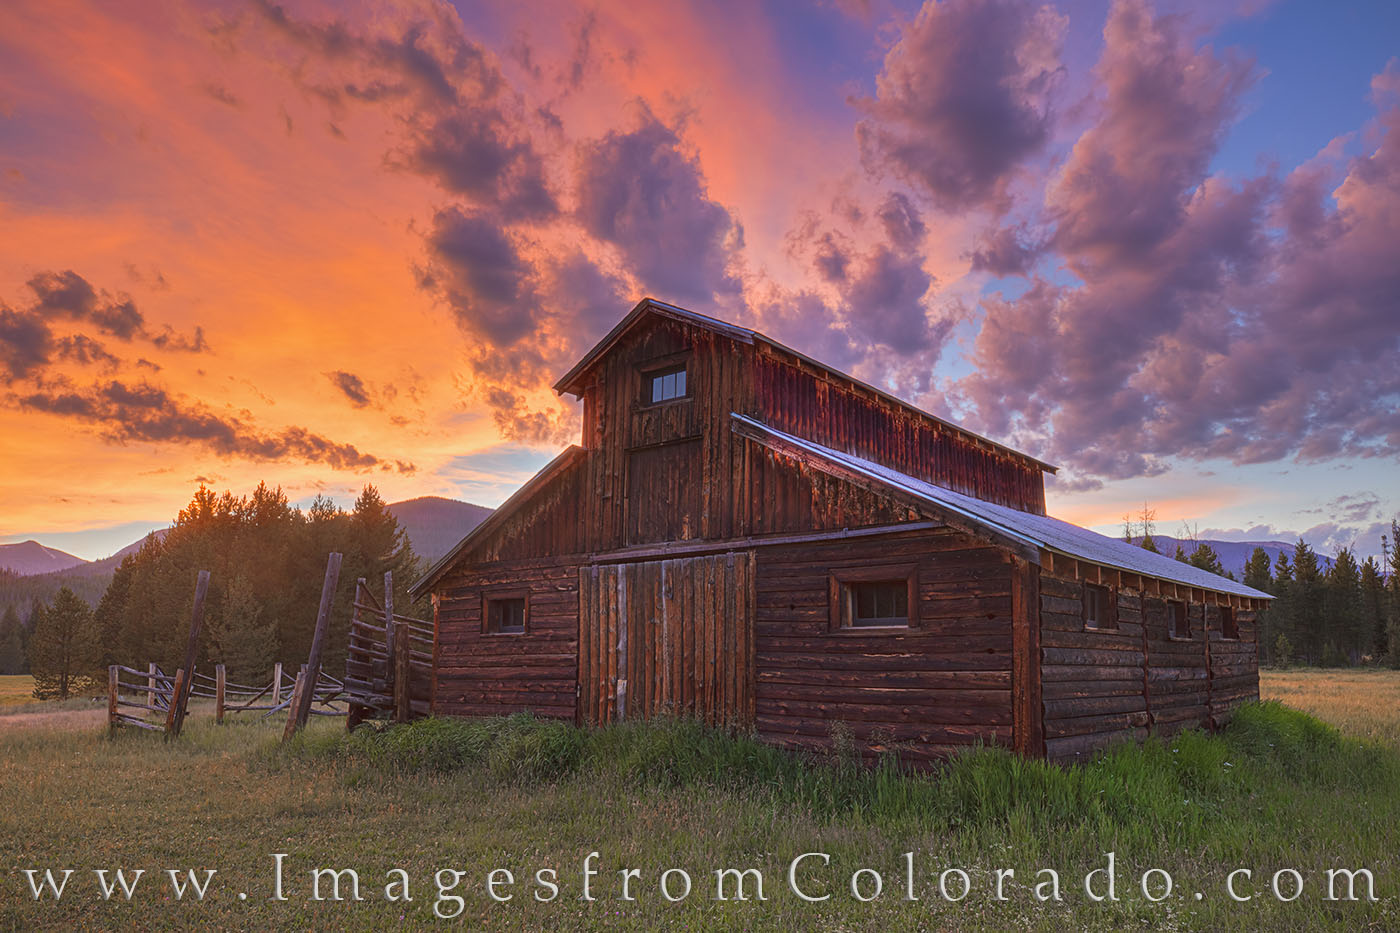 This old barn on the west side of Rocky Mountain National Park just a few miles from Grand Lake, Colorado, was once part of an...